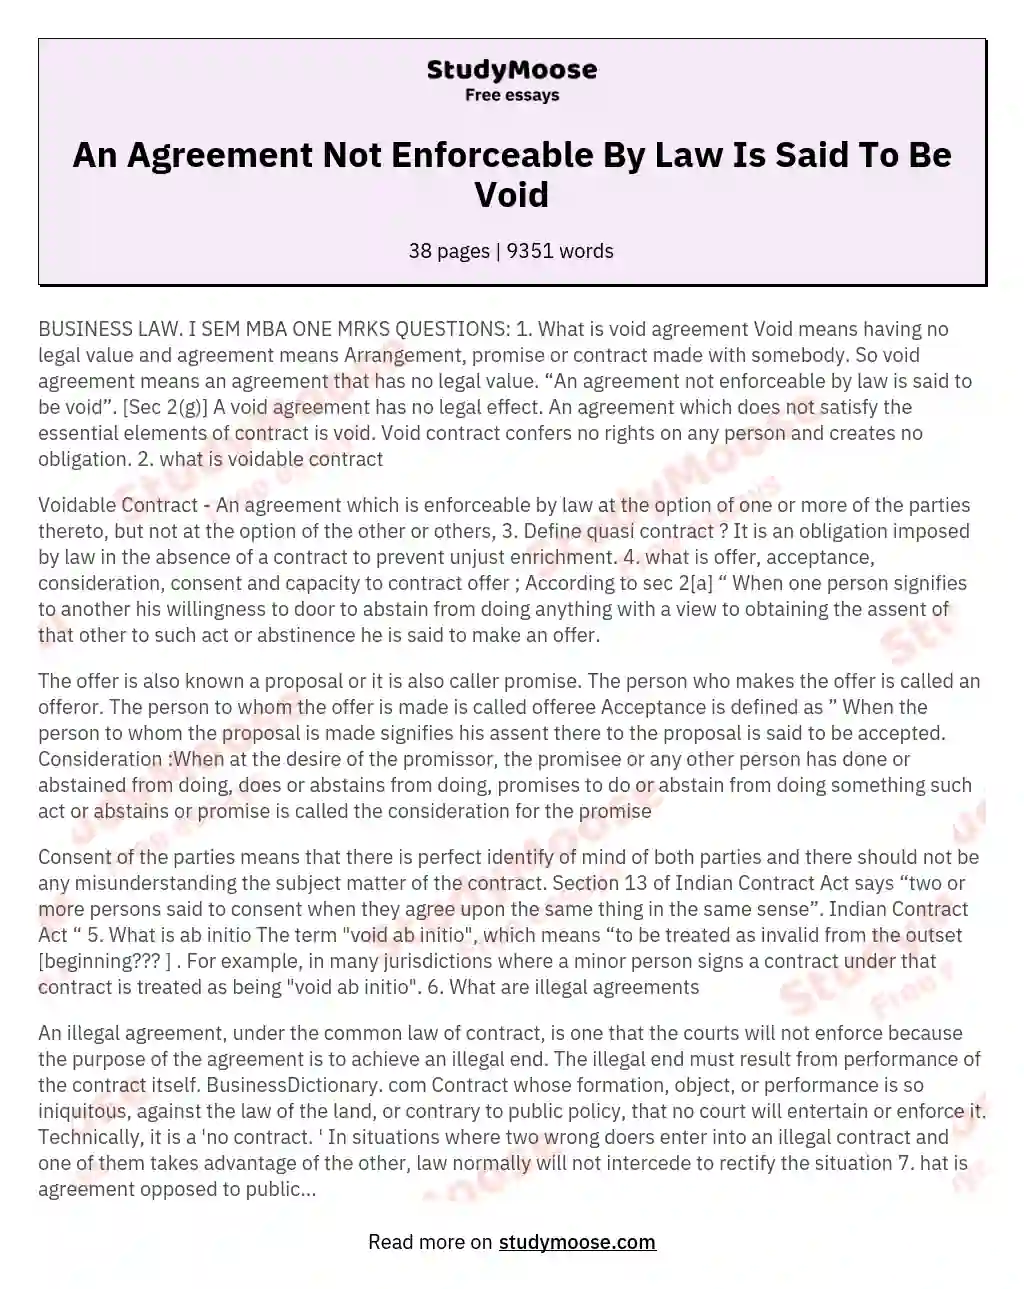 An Agreement Not Enforceable By Law Is Said To Be Void essay